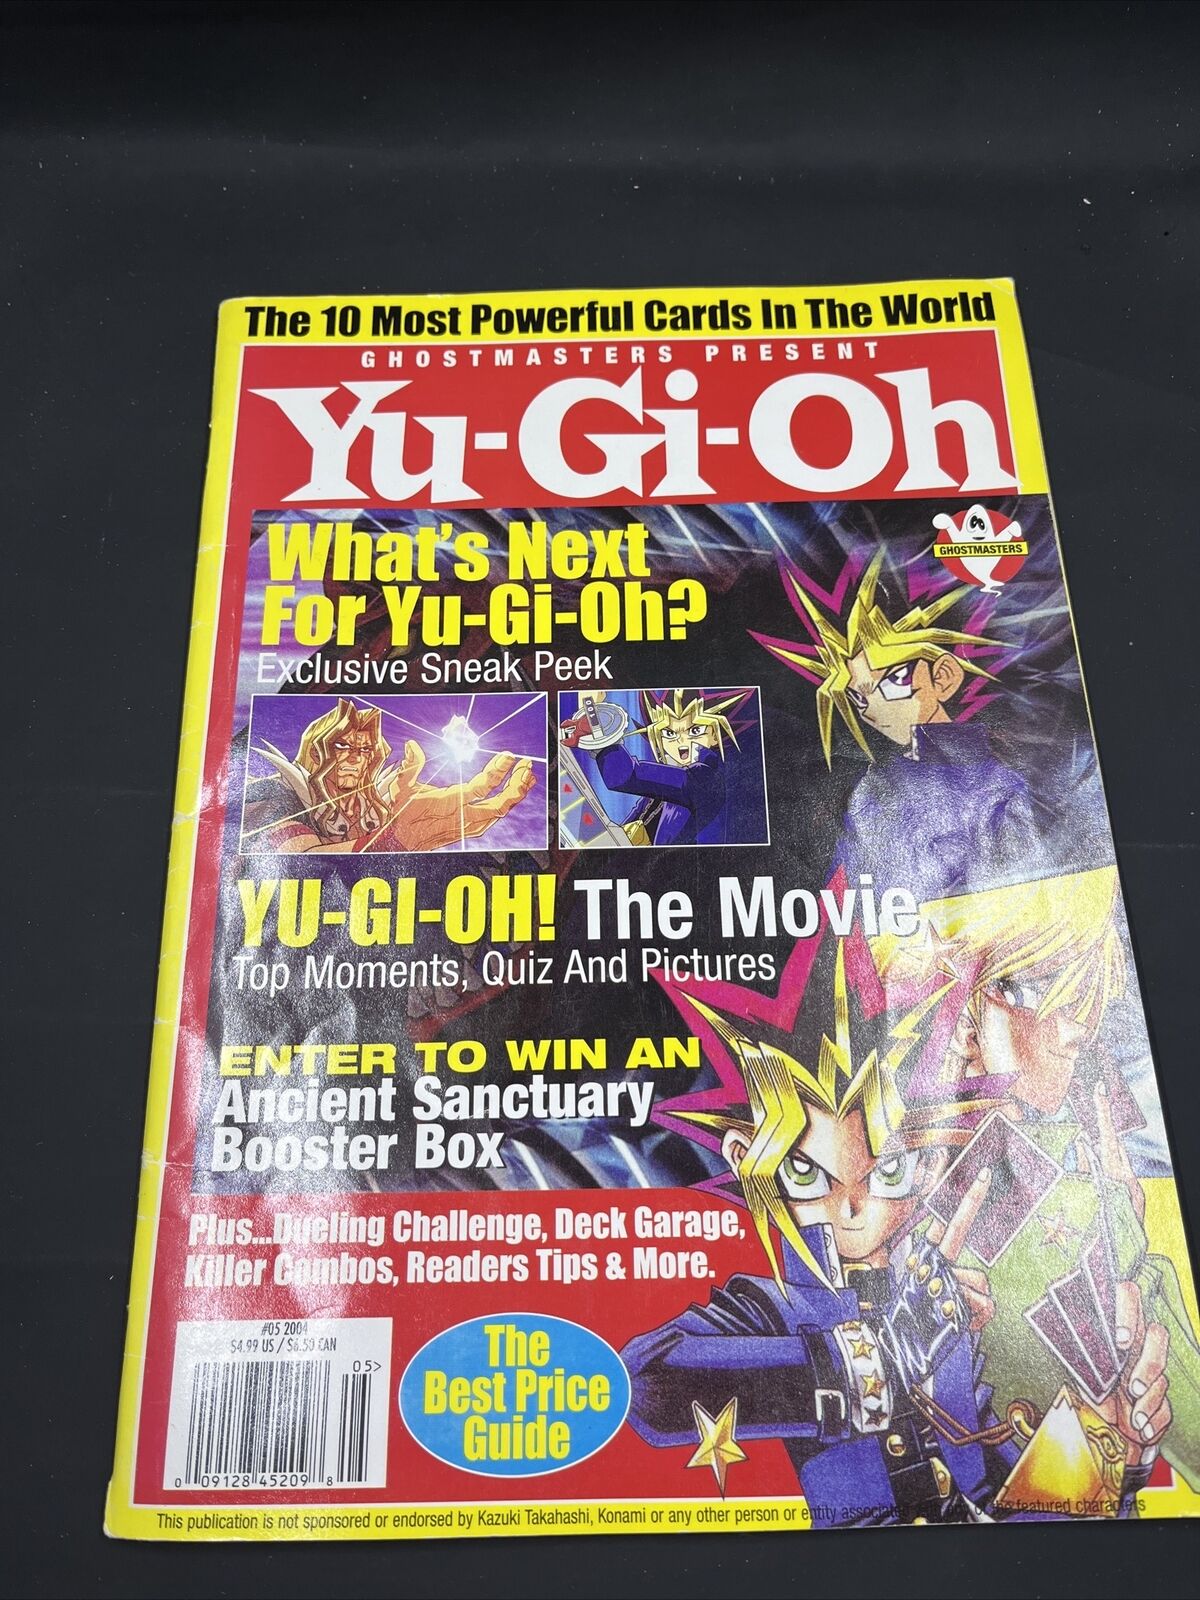 Ghostmasters Presents Yu-Gi-Oh 2004 #5 Price Guide (P128)